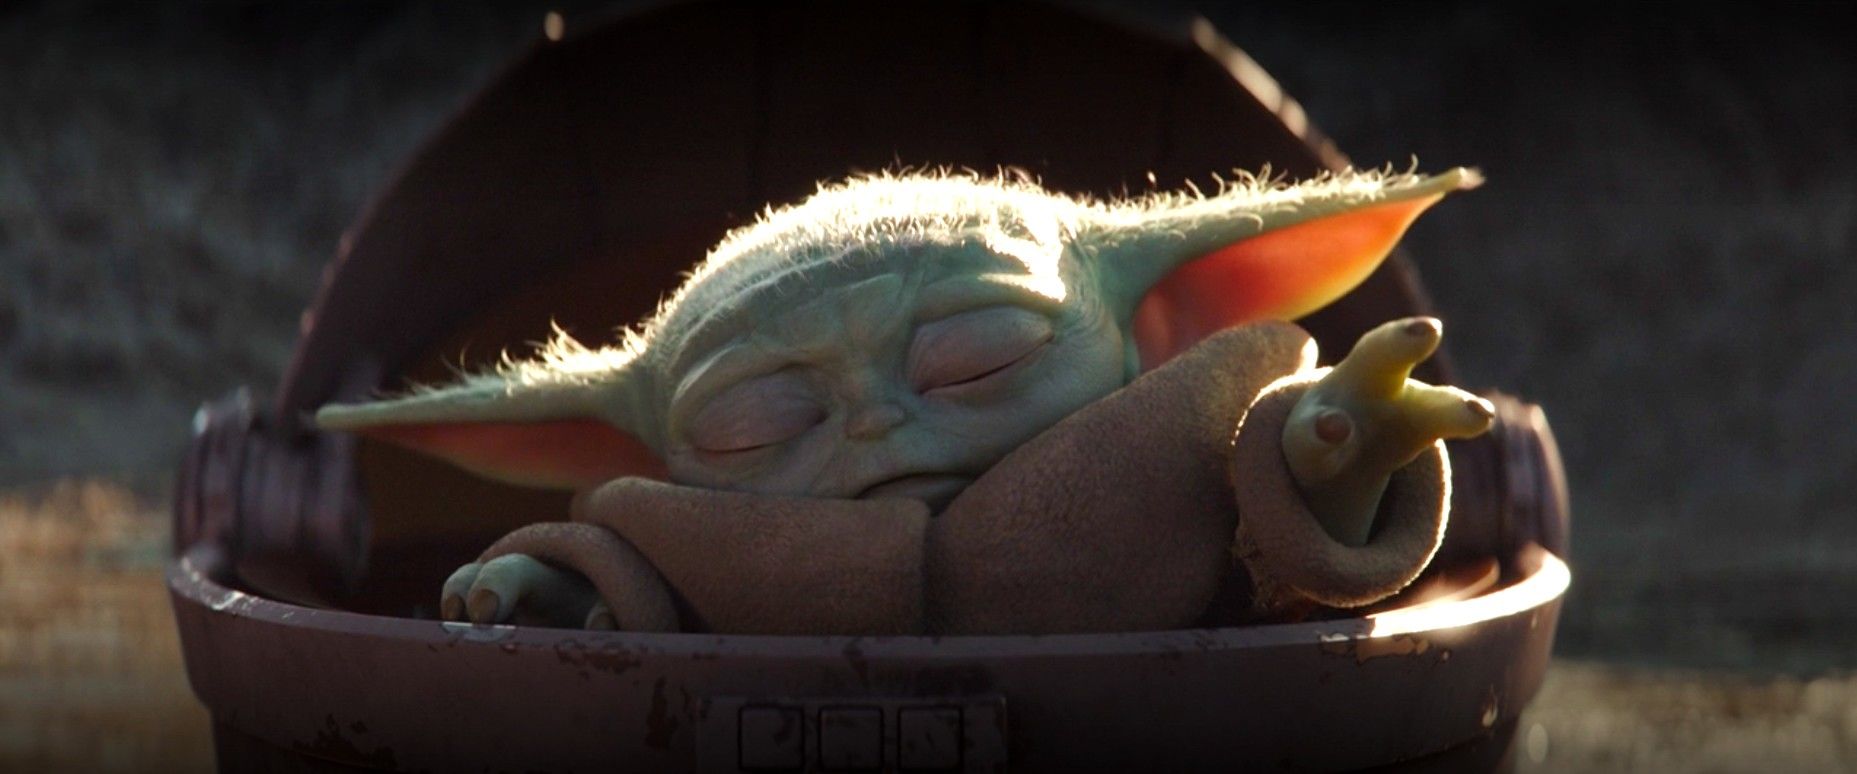 Yoda Baby using the Force